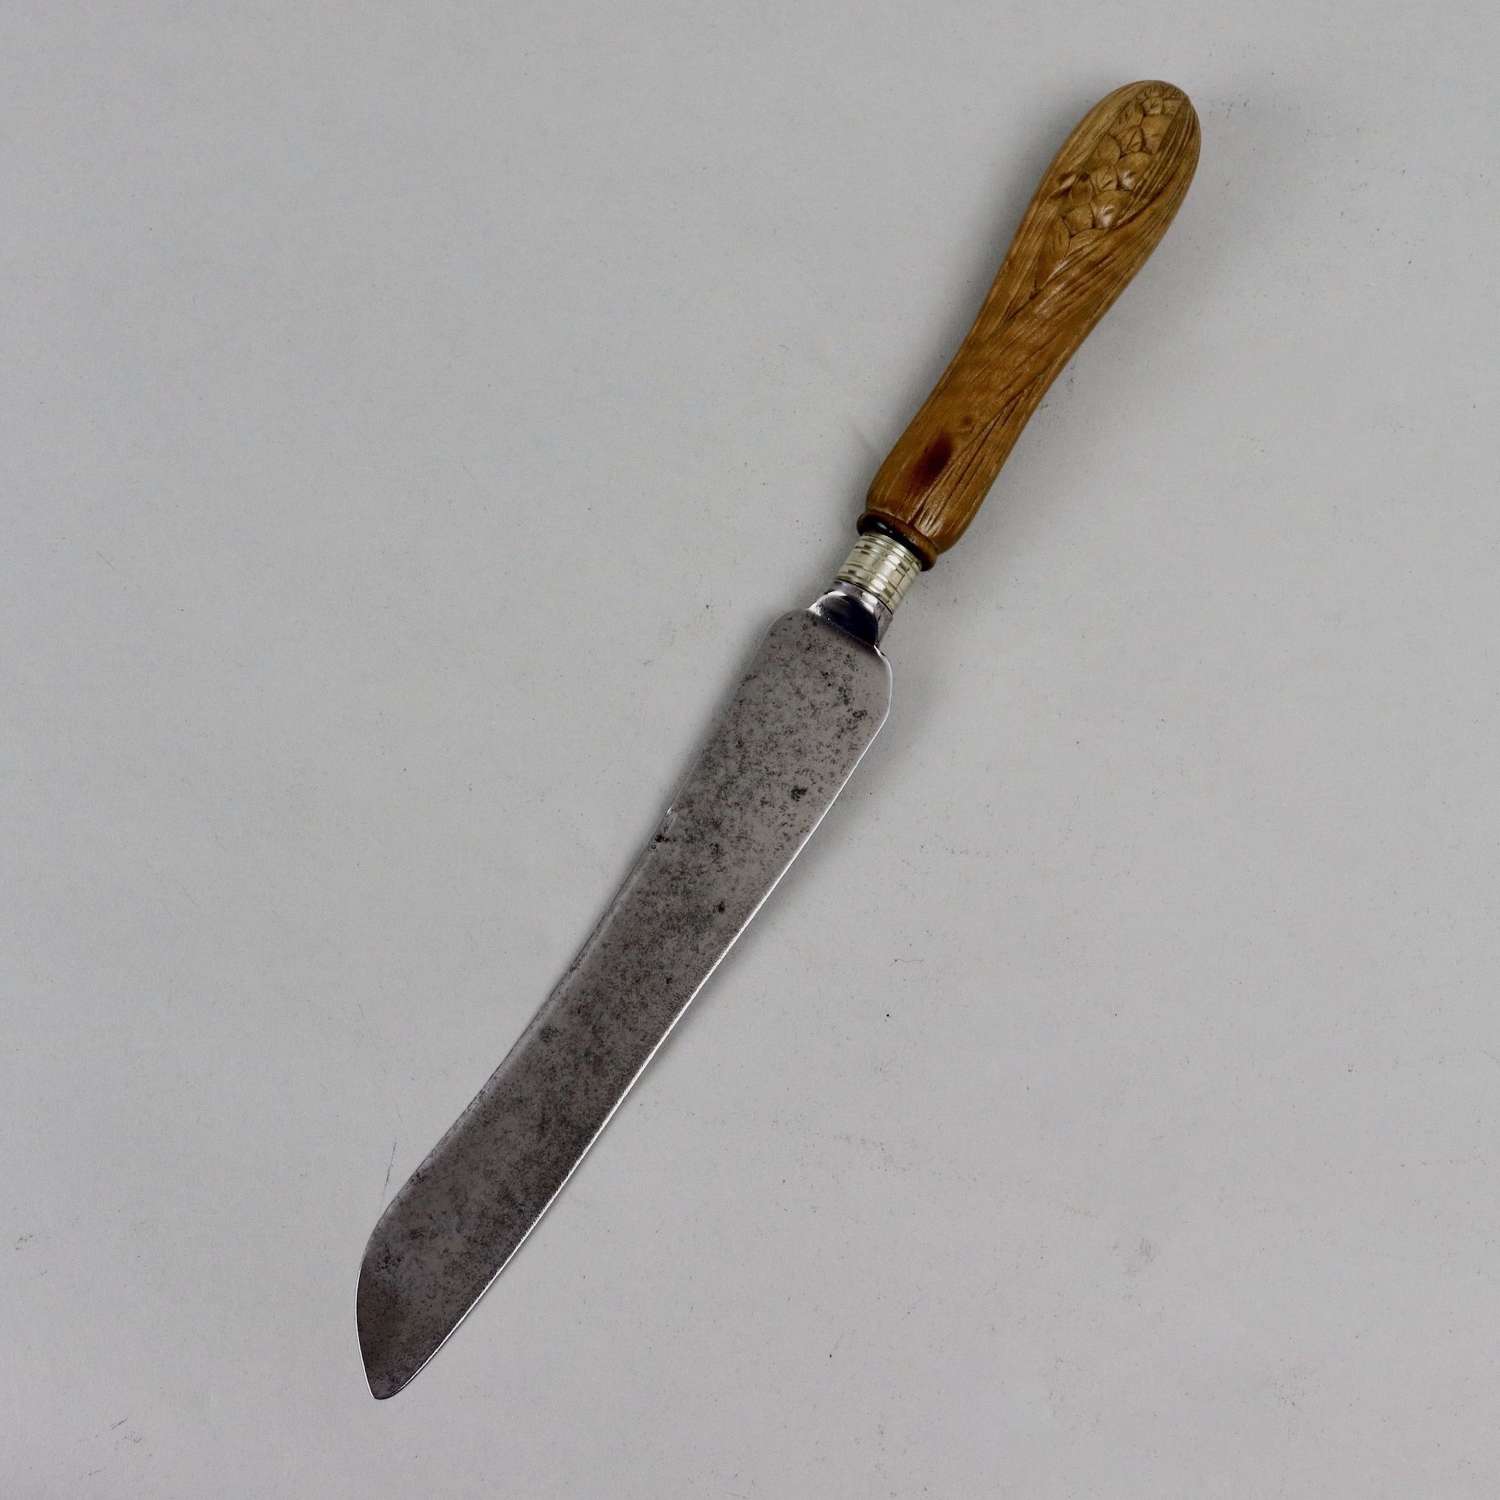 Bread knife with carved, sycamore handle